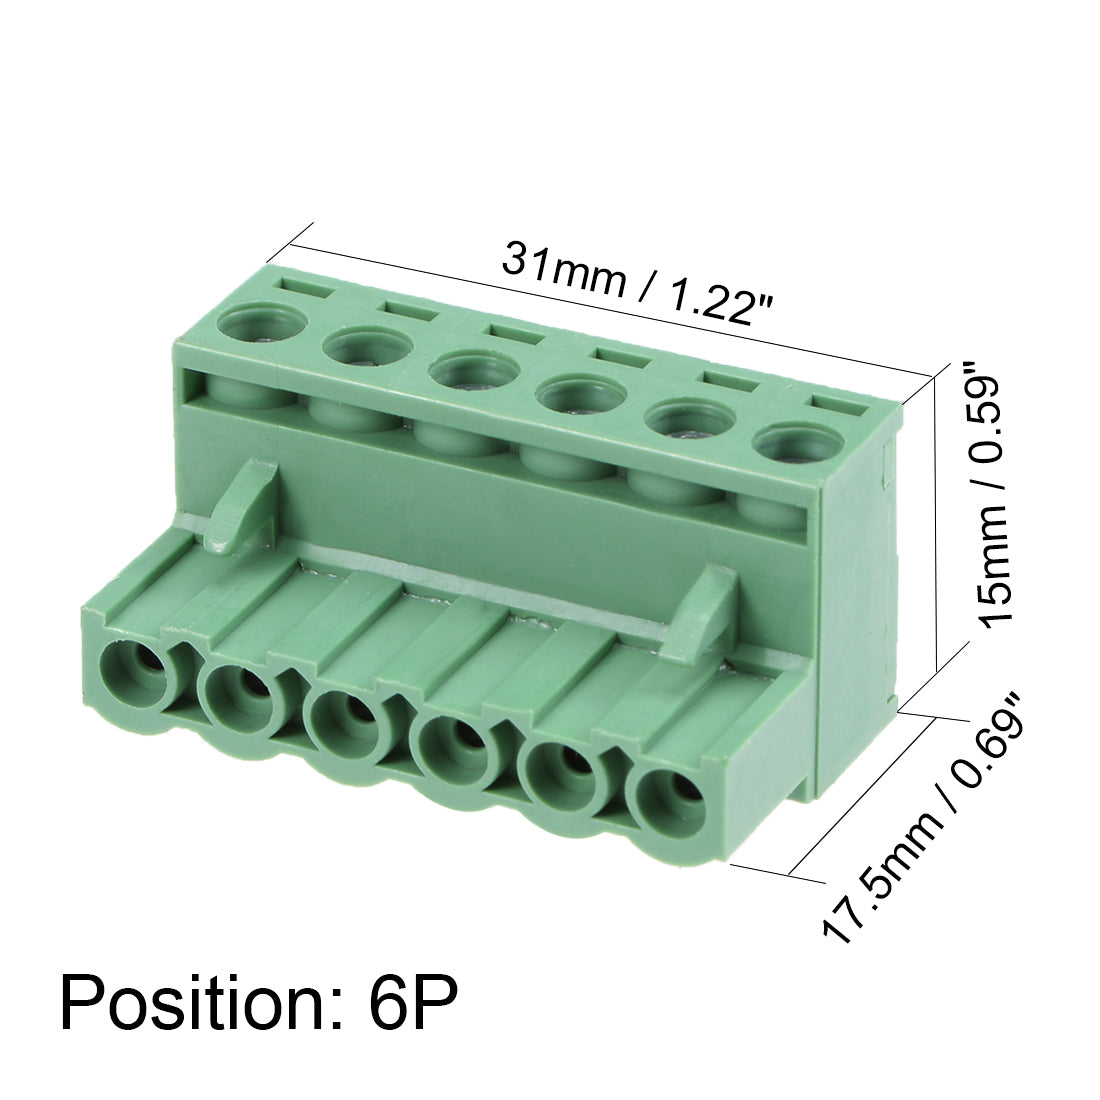 uxcell Uxcell 5Pcs AC300V 15A 5.08mm Pitch 6P Flat Angle Needle Seat Insert-In PCB Terminal Block Connector green